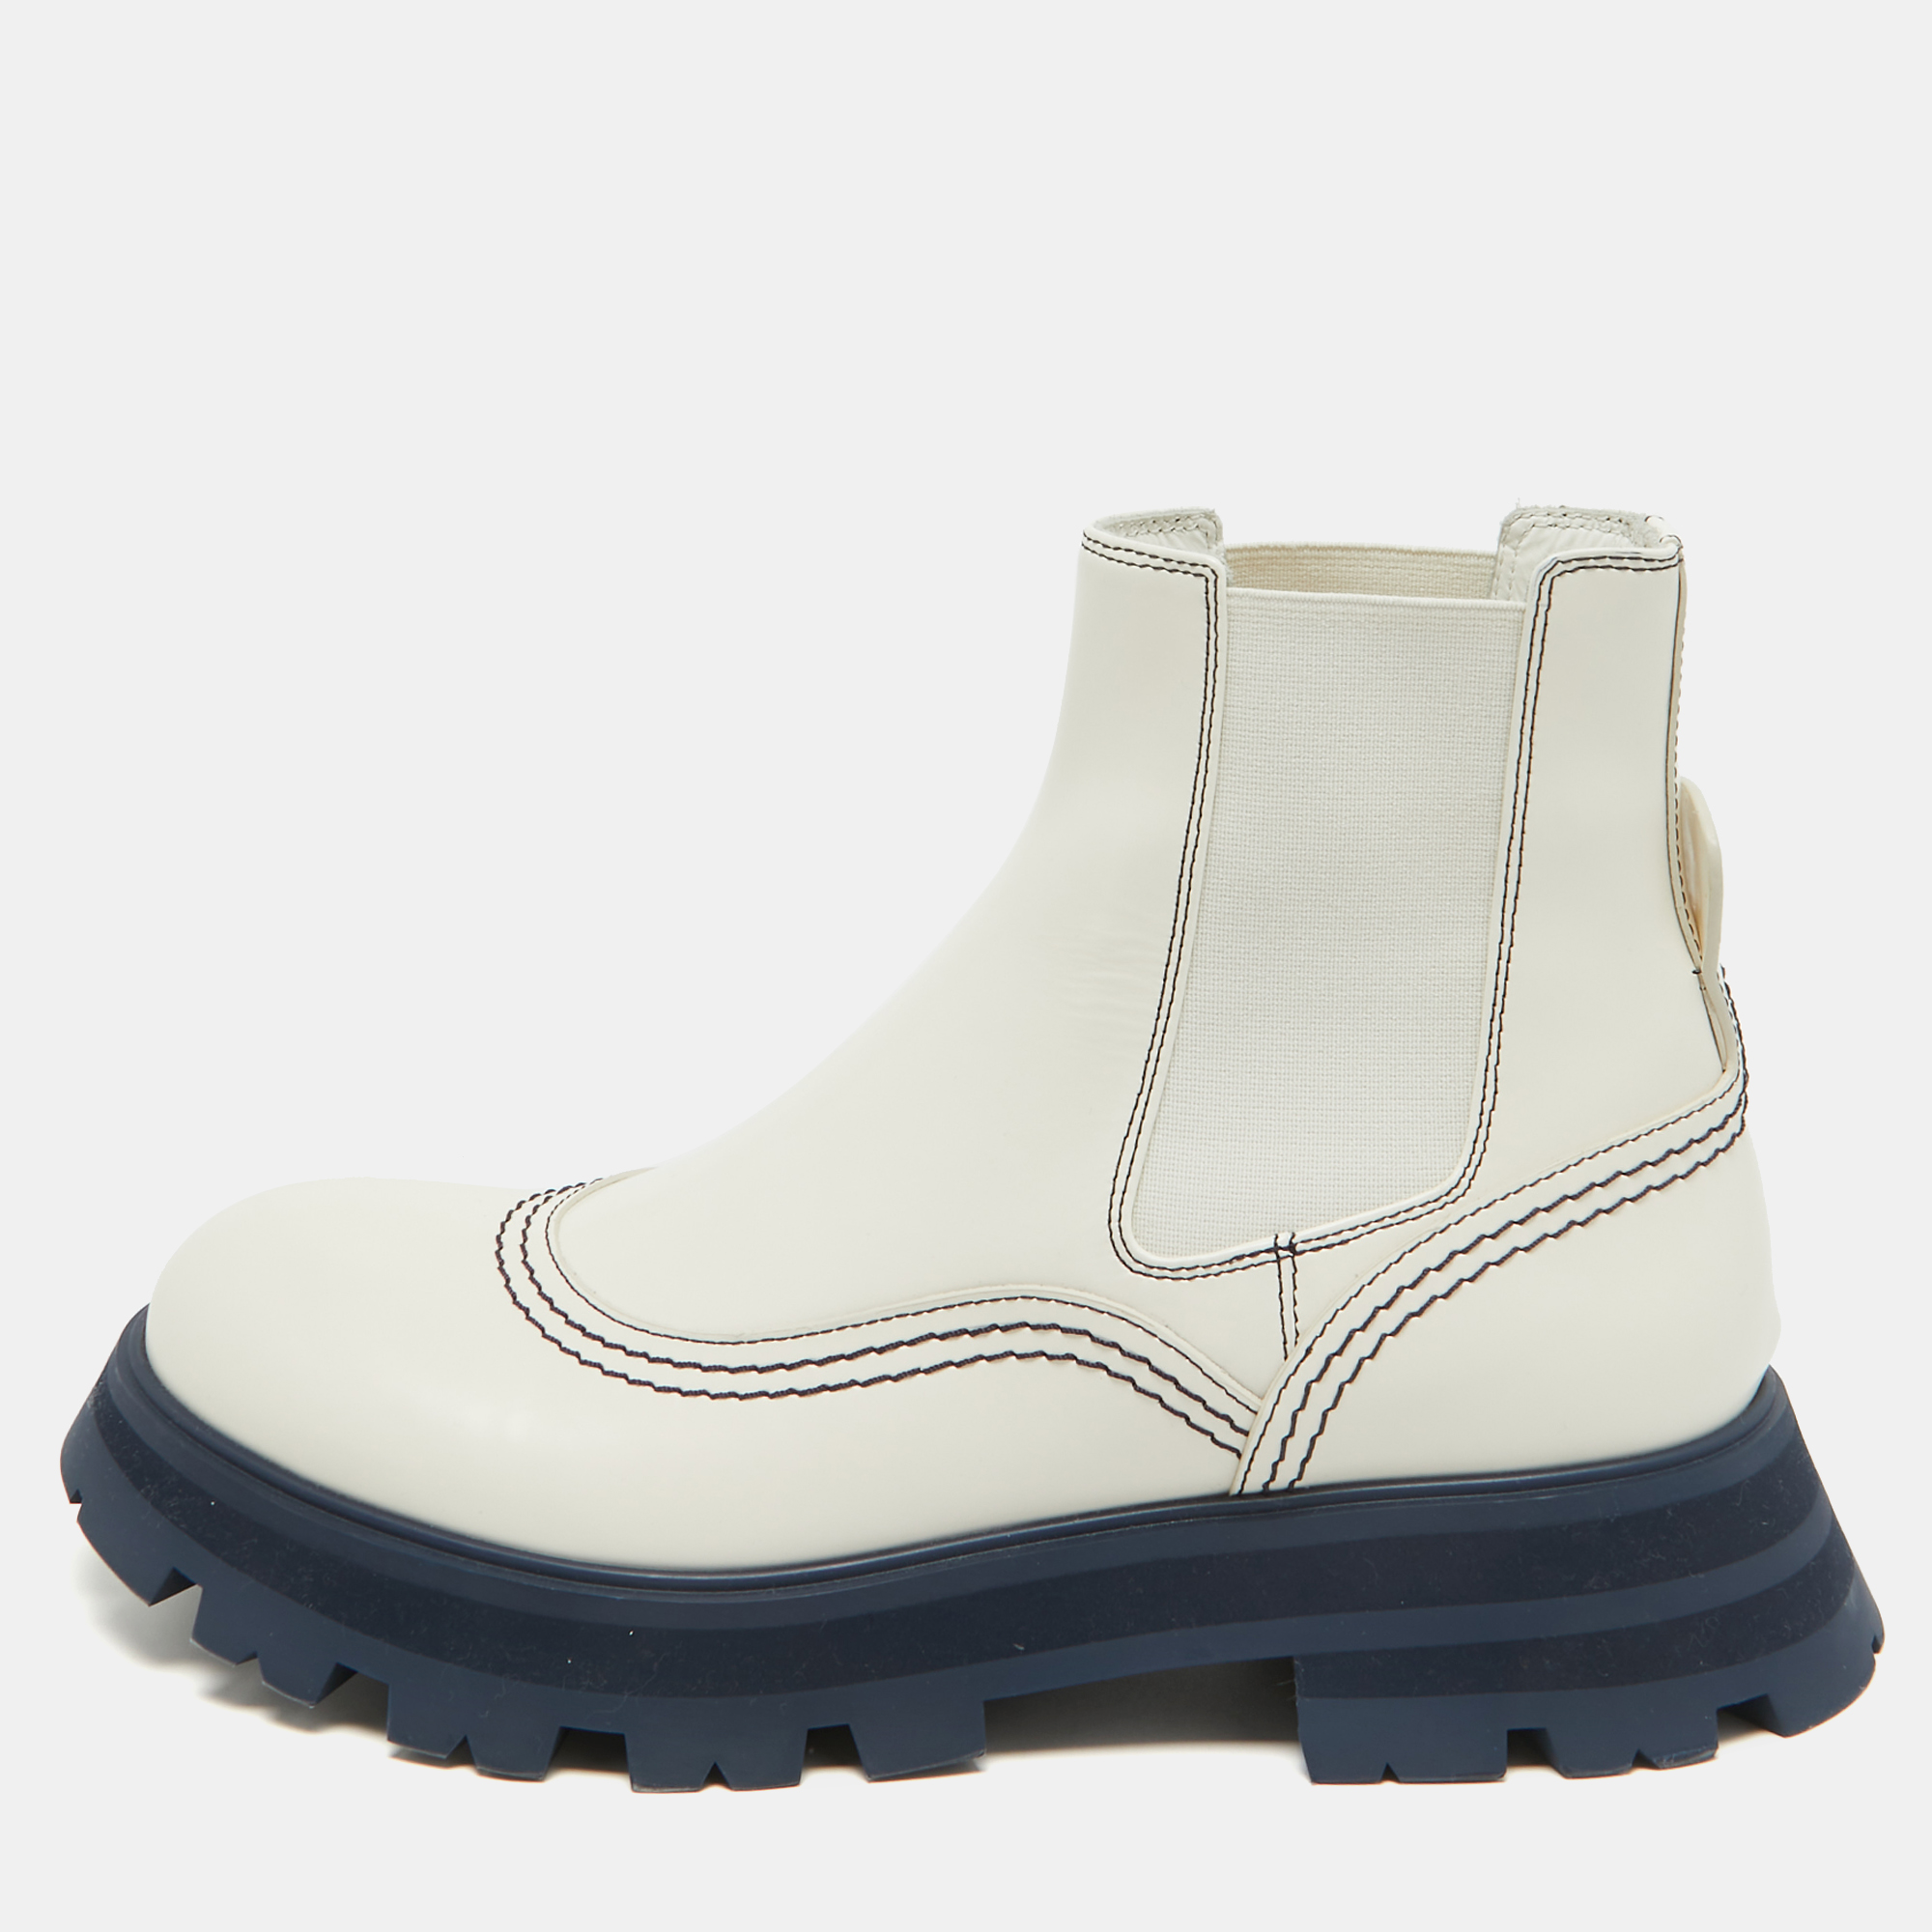 Alexander mcqueen white leather wander chelsea boots size 40